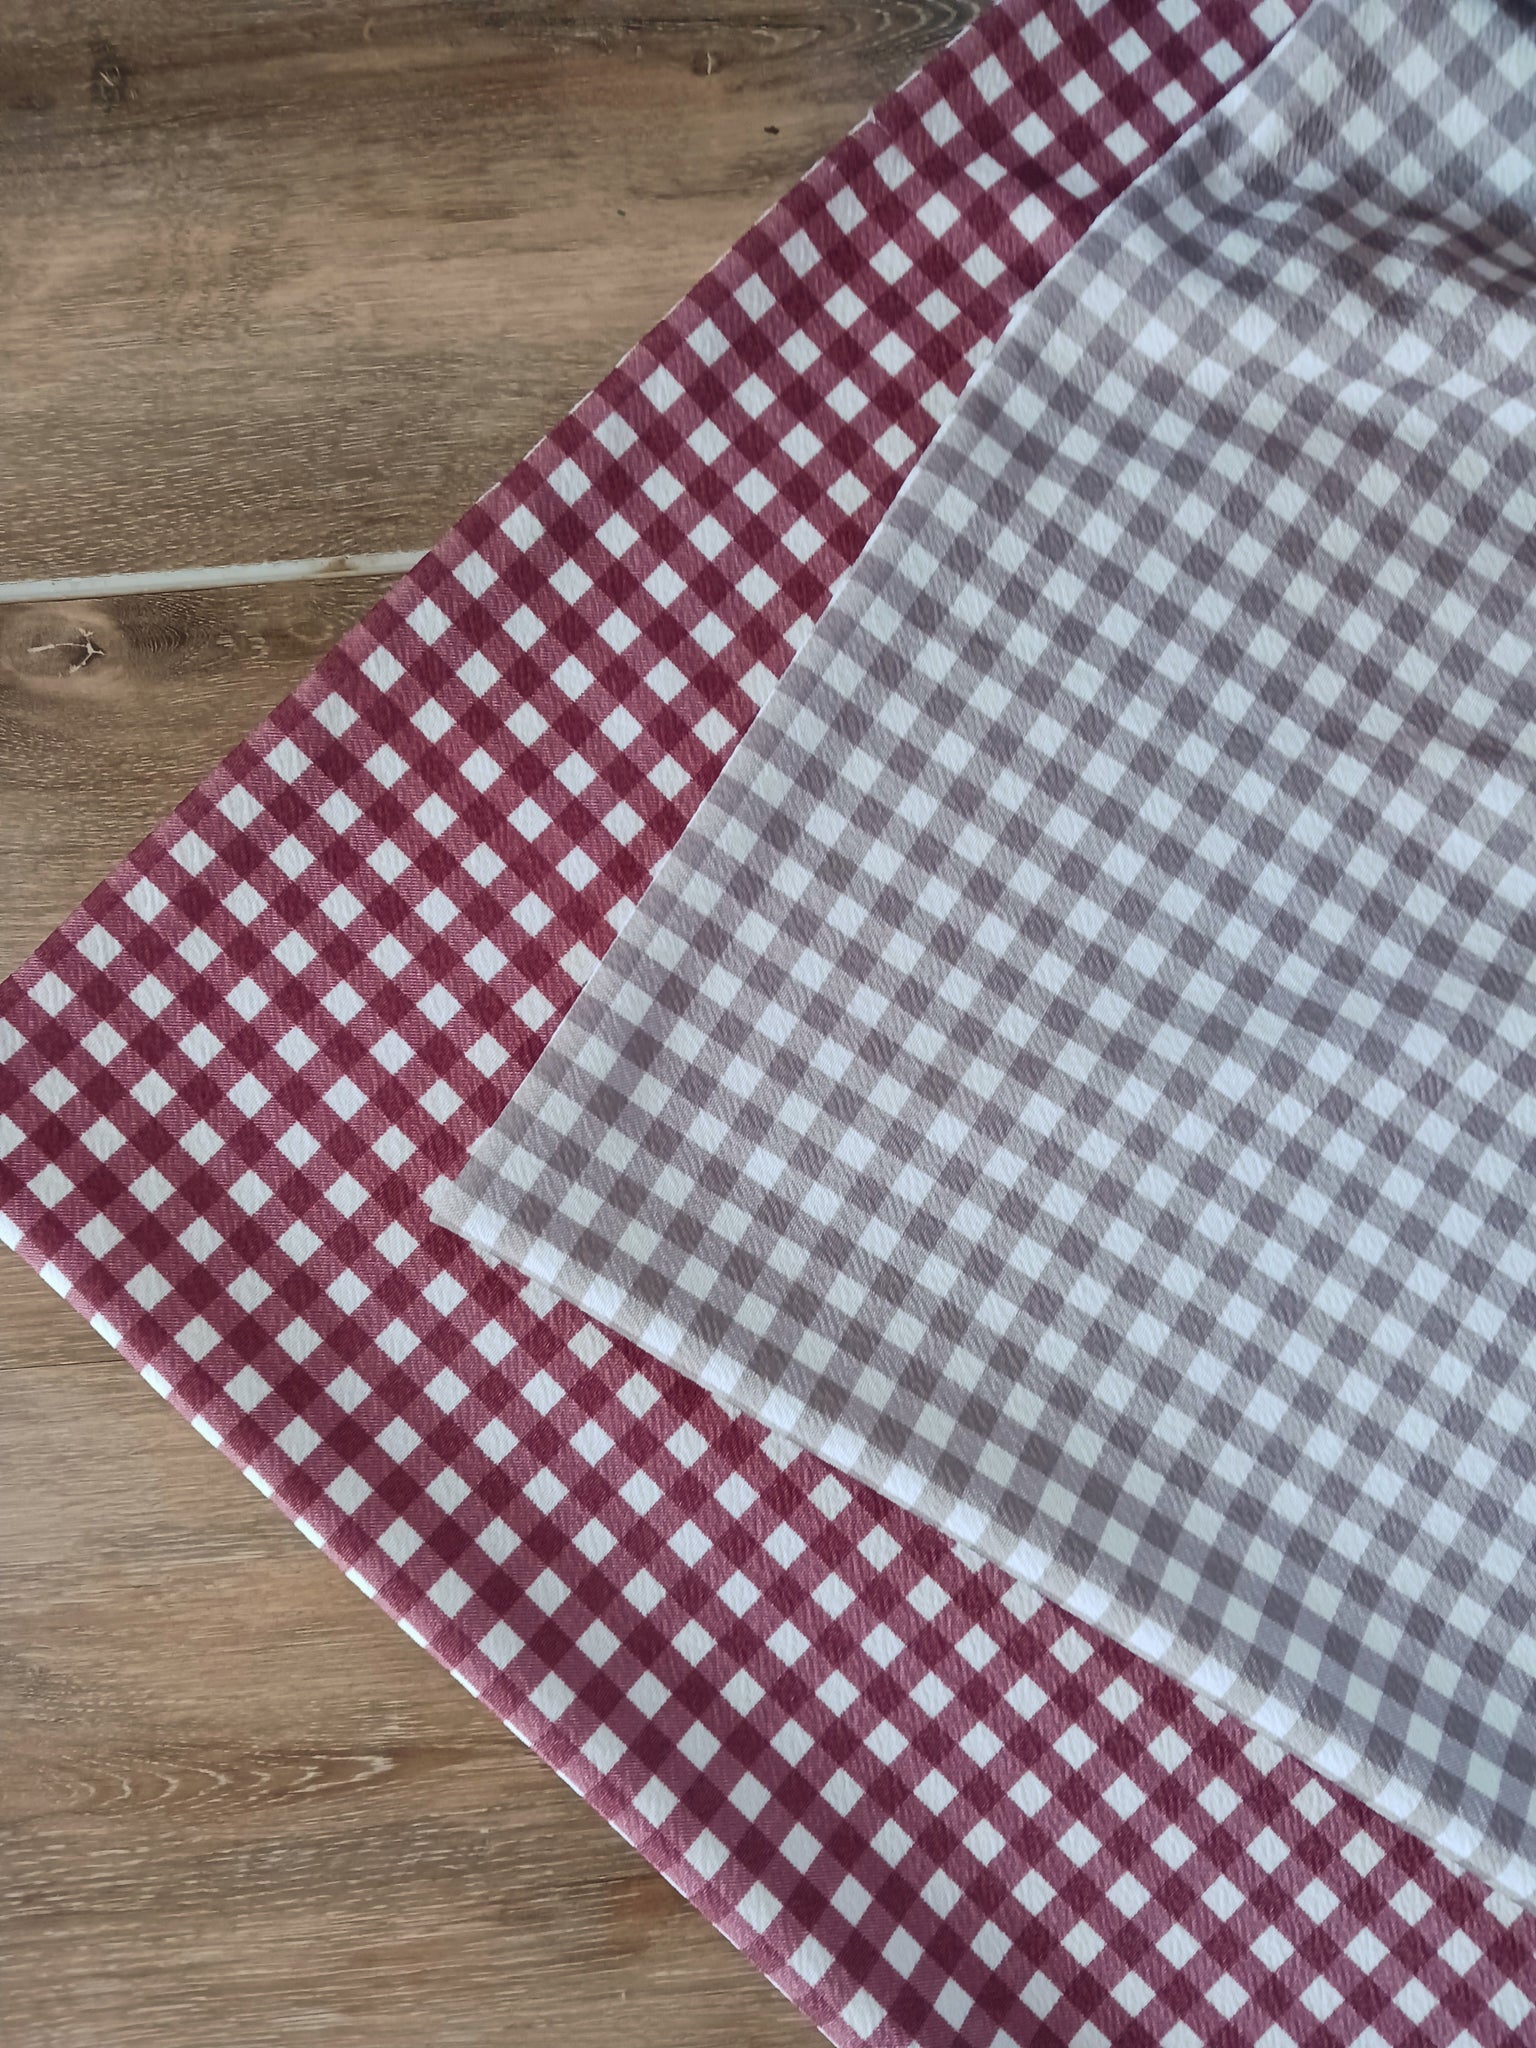 Gingham Small Plaid | Lightweight Liverpool Knit|By the Half Yard